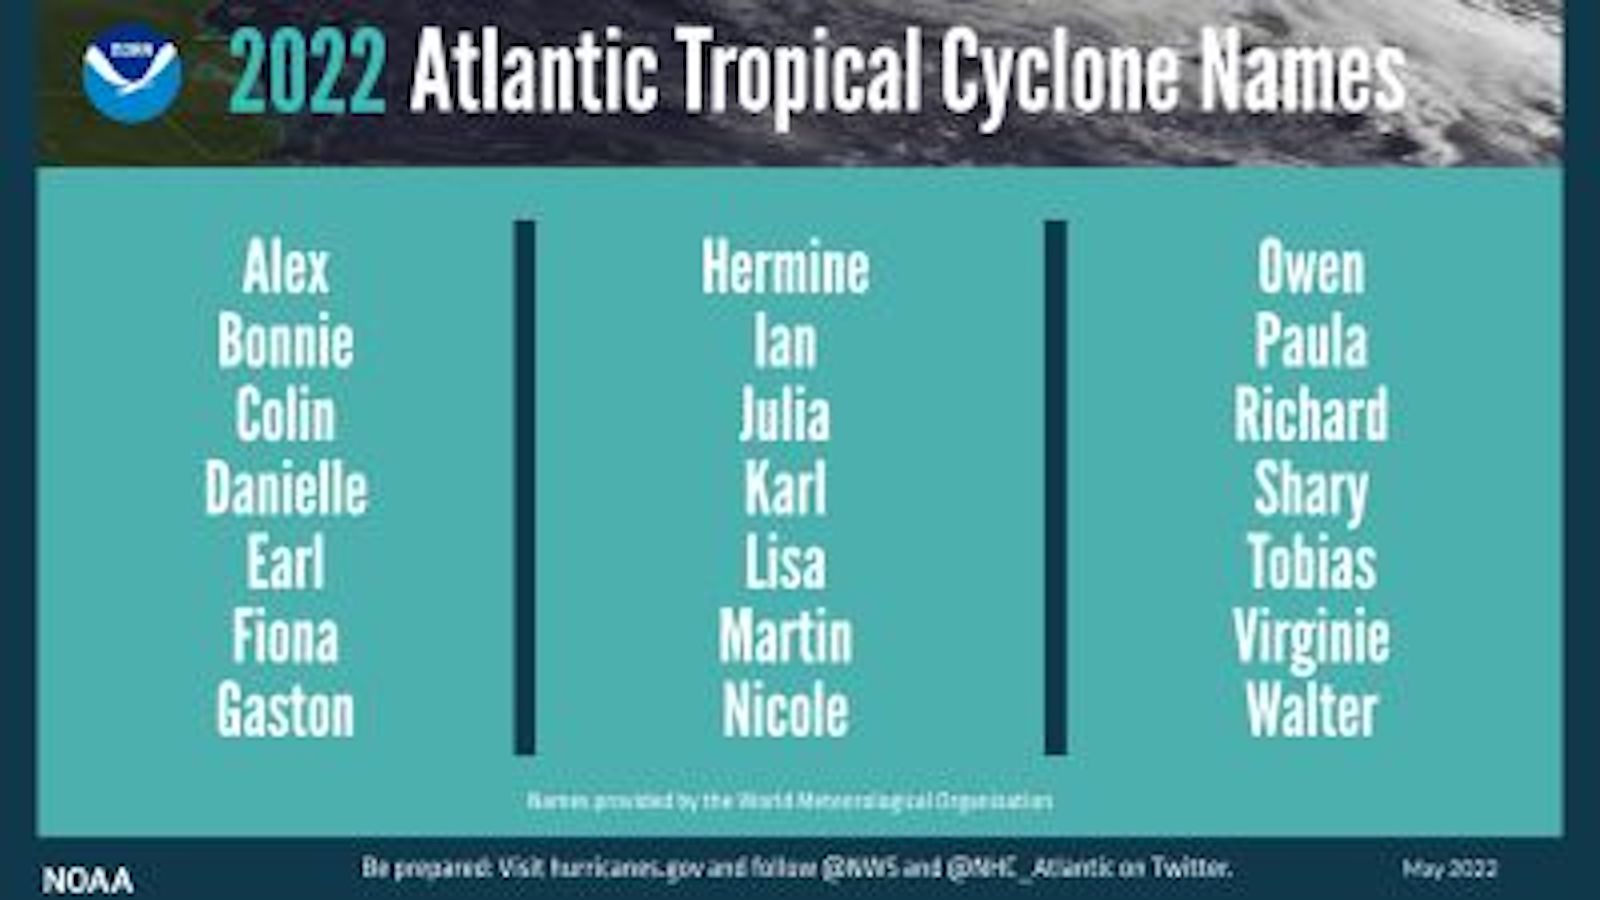 A summary graphic showing an alphabetical list of the 2022 Atlantic tropical cyclone names as selected by the World Meteorological Organization. The official start of the Atlantic hurricane season is June 1 and runs through November 30.